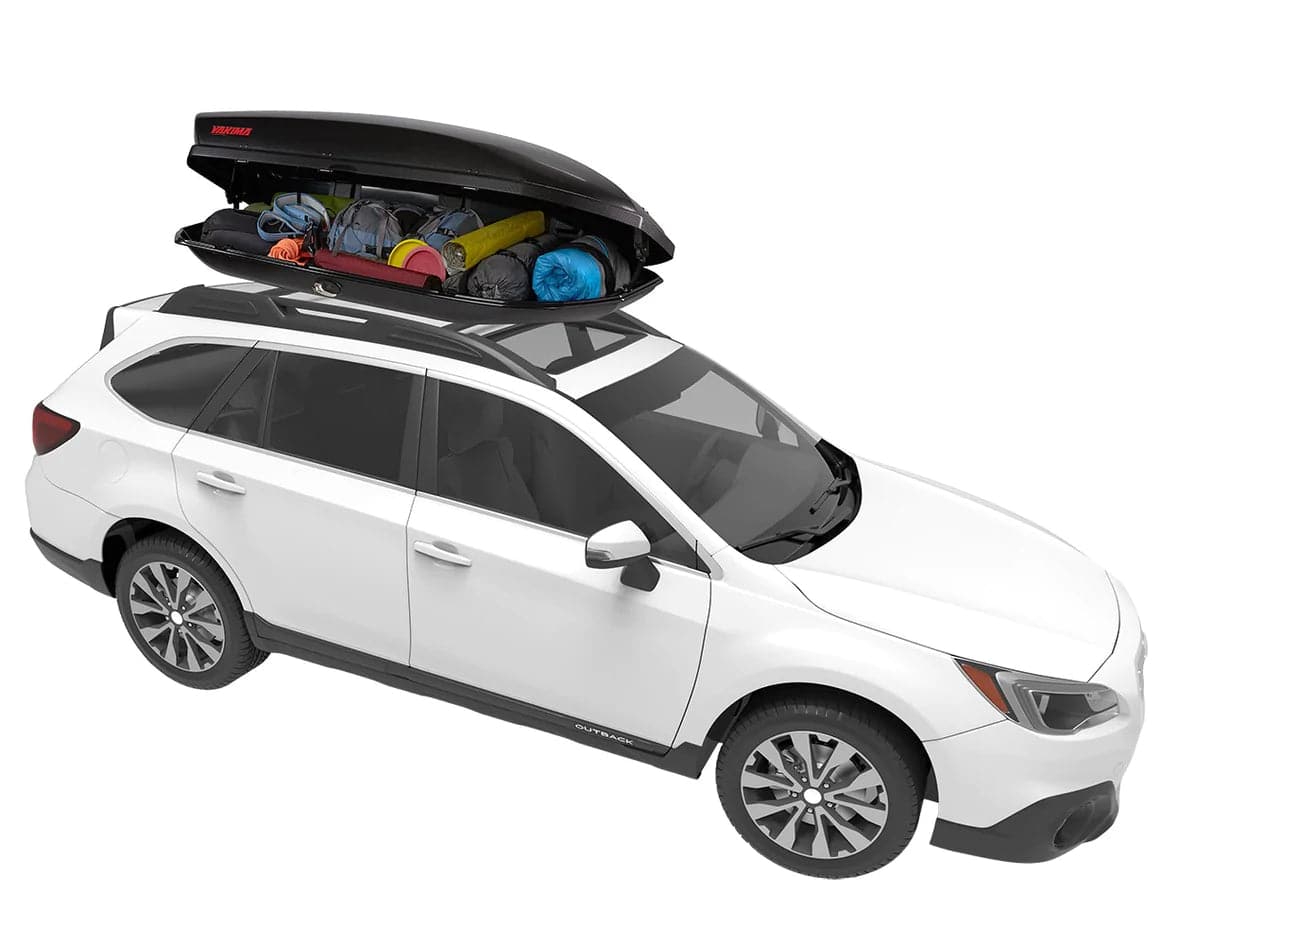 Featuring the Skybox 16 Carbonite cargo box, storage manufactured by Yakima shown here from a third angle.